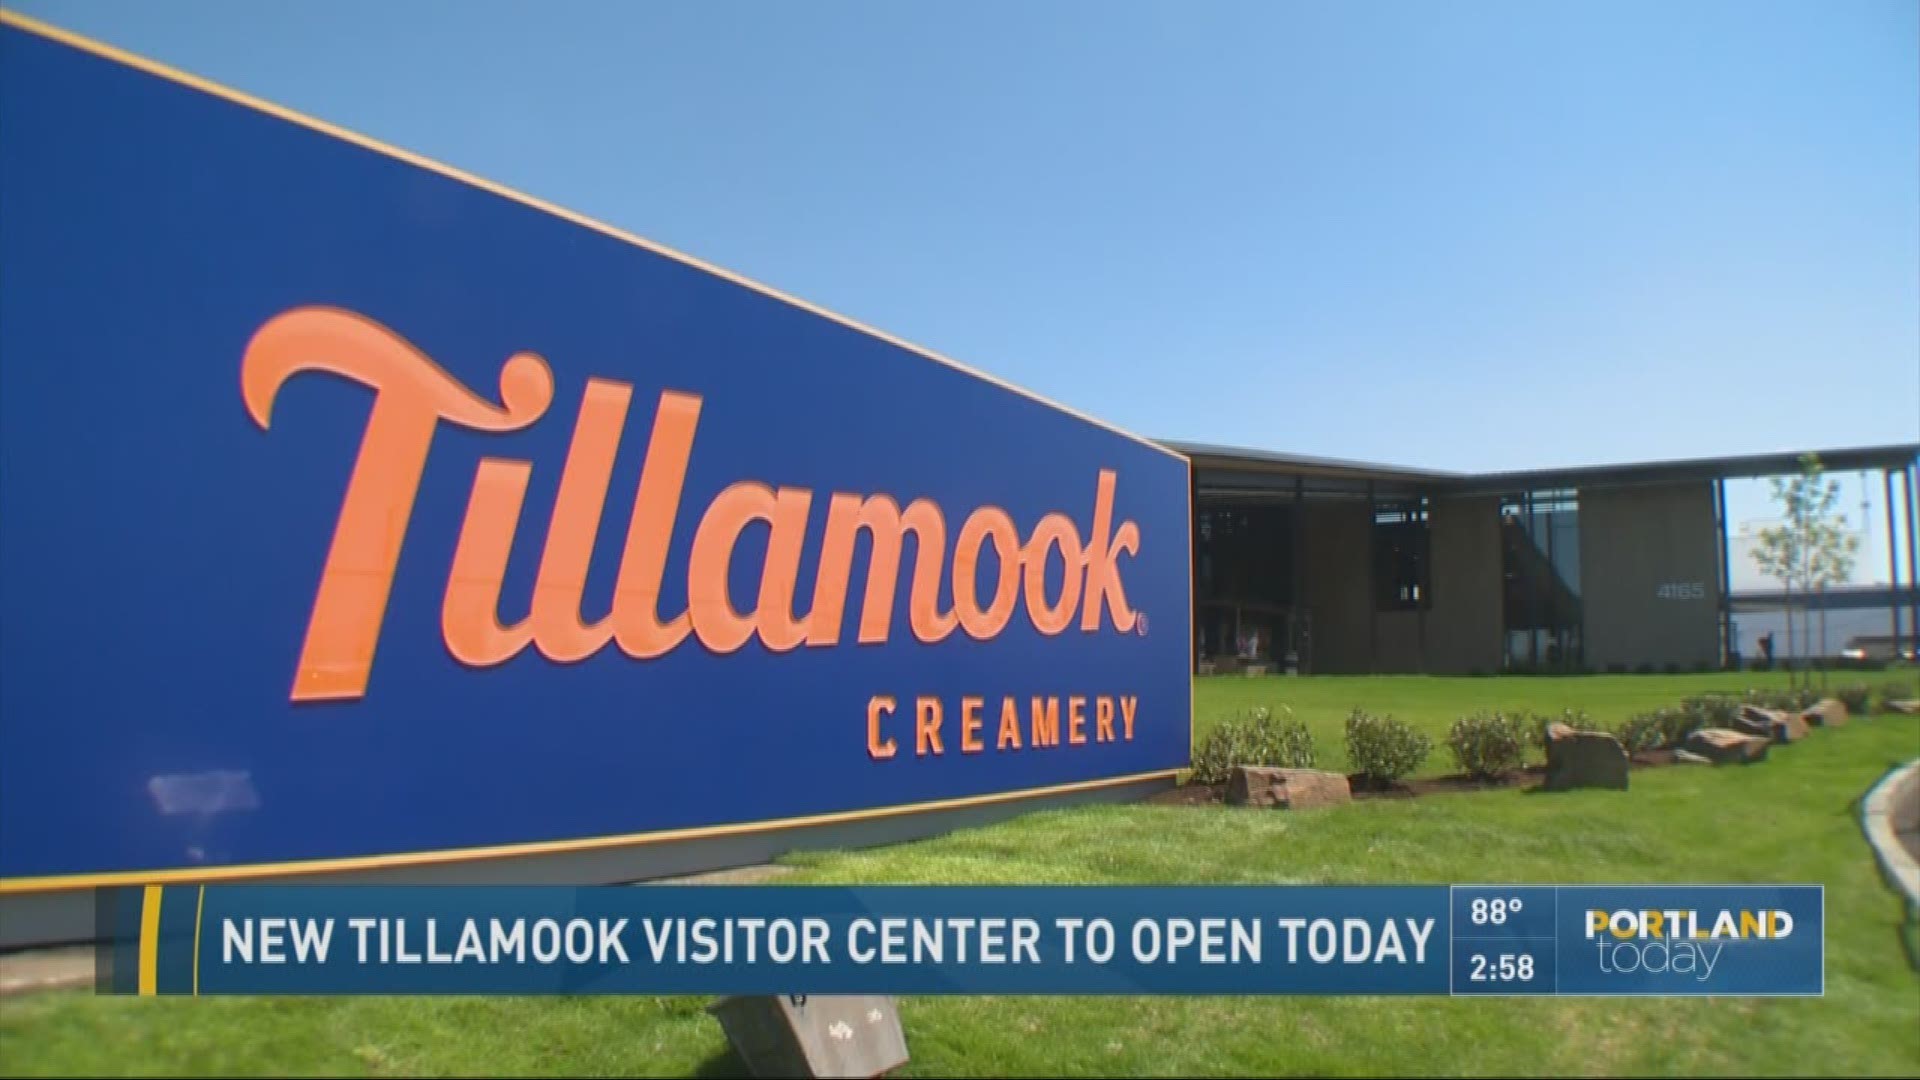 New Tillamook visitor center to open today